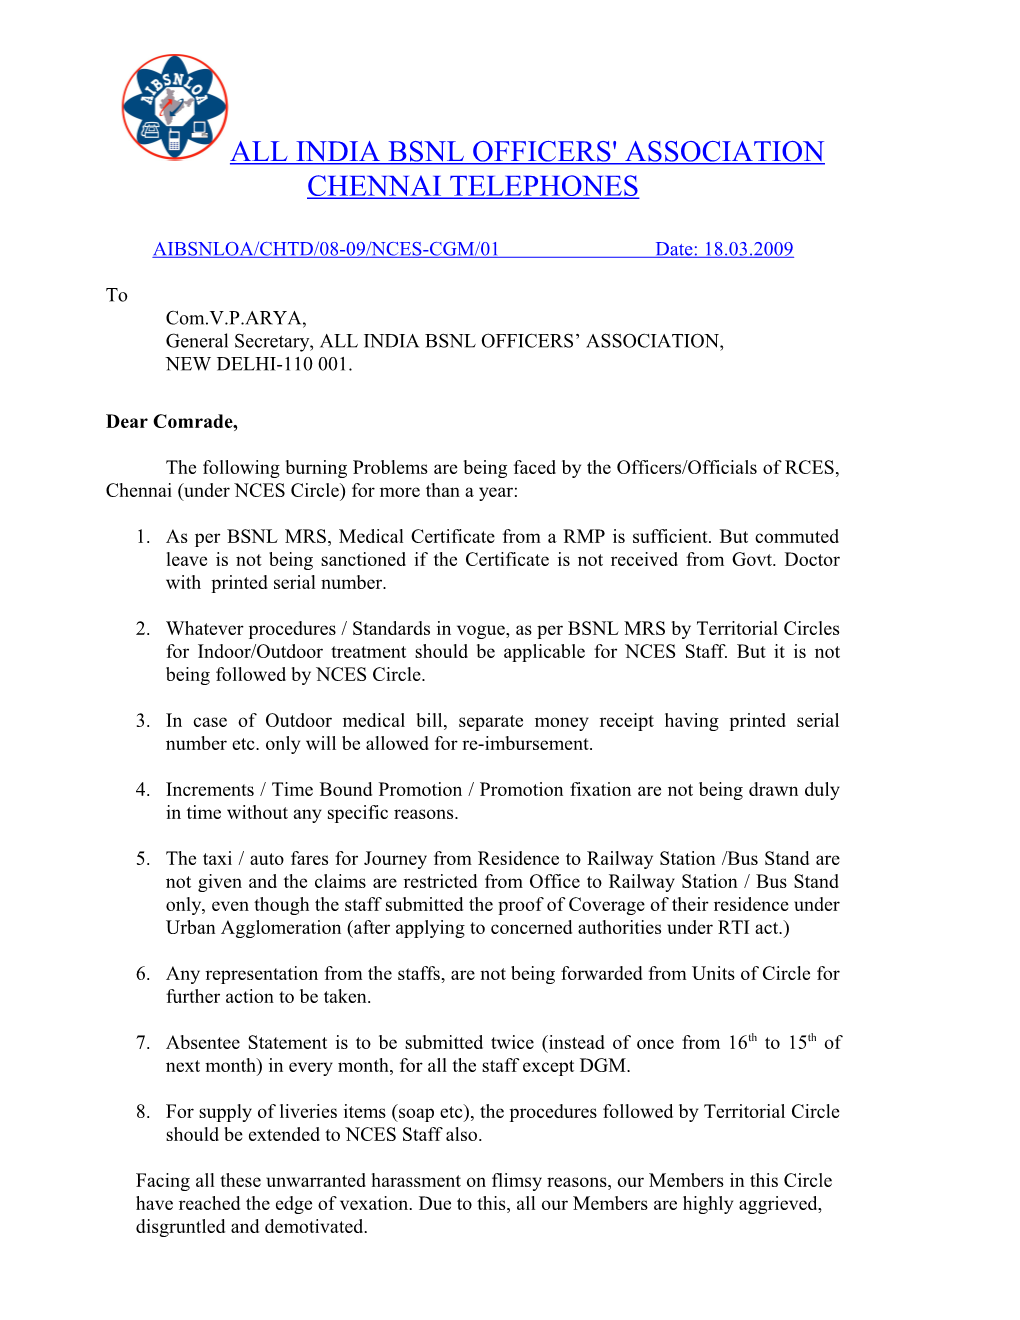 The Following Problems Are Being Faced by the Officers/Officials of RCES, Chennai (Under